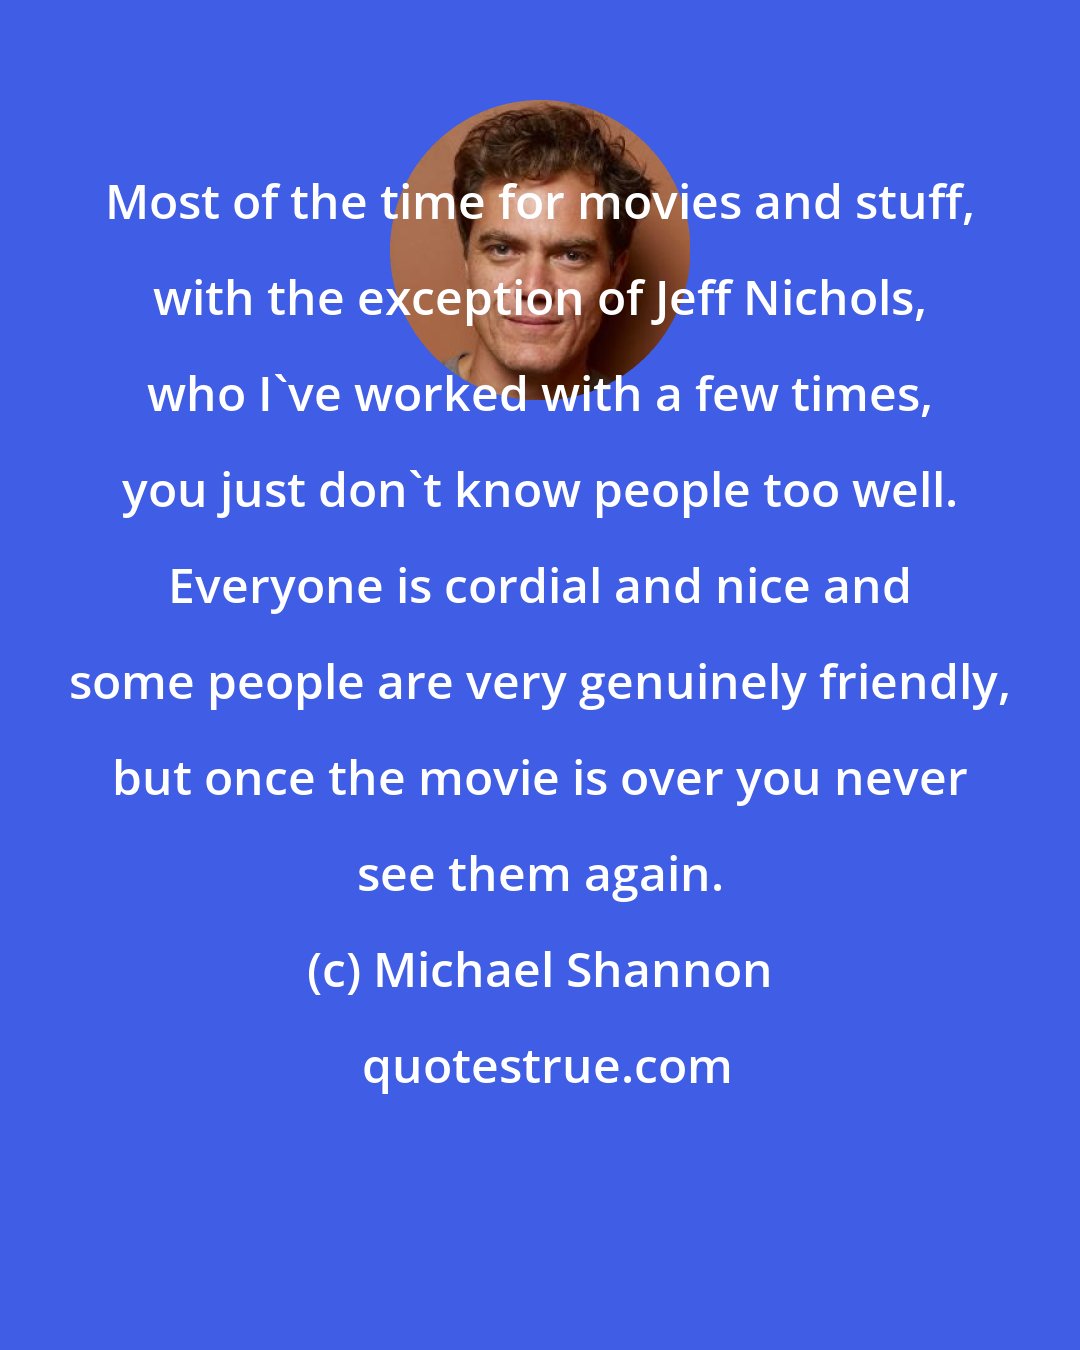 Michael Shannon: Most of the time for movies and stuff, with the exception of Jeff Nichols, who I've worked with a few times, you just don't know people too well. Everyone is cordial and nice and some people are very genuinely friendly, but once the movie is over you never see them again.